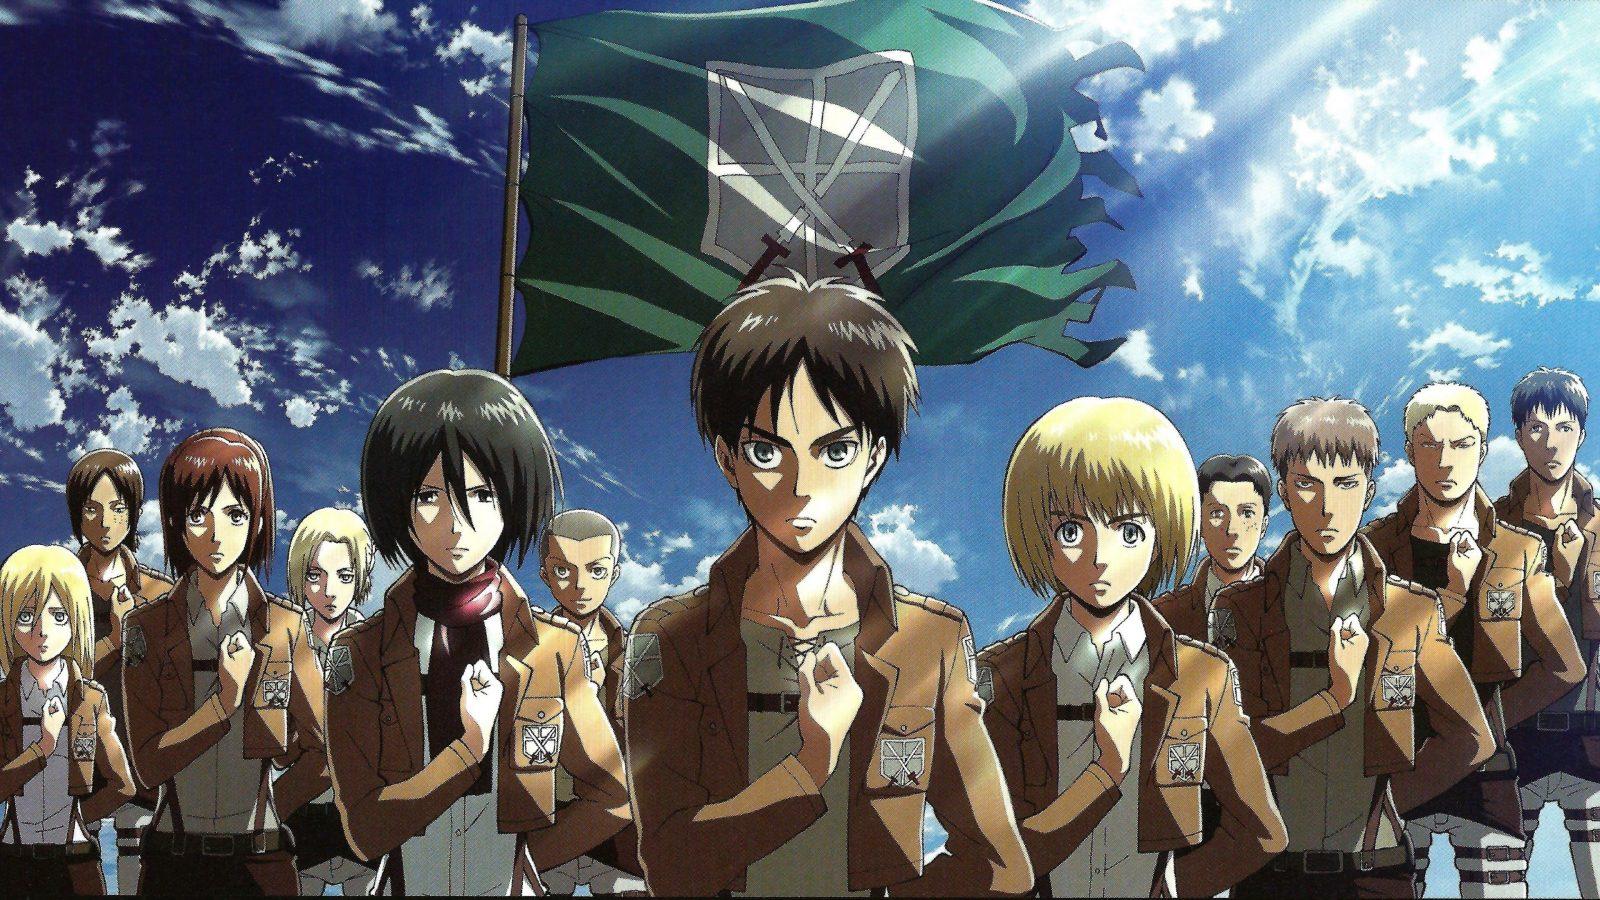 Attack on Titan final season part 3: Release date and what to expect